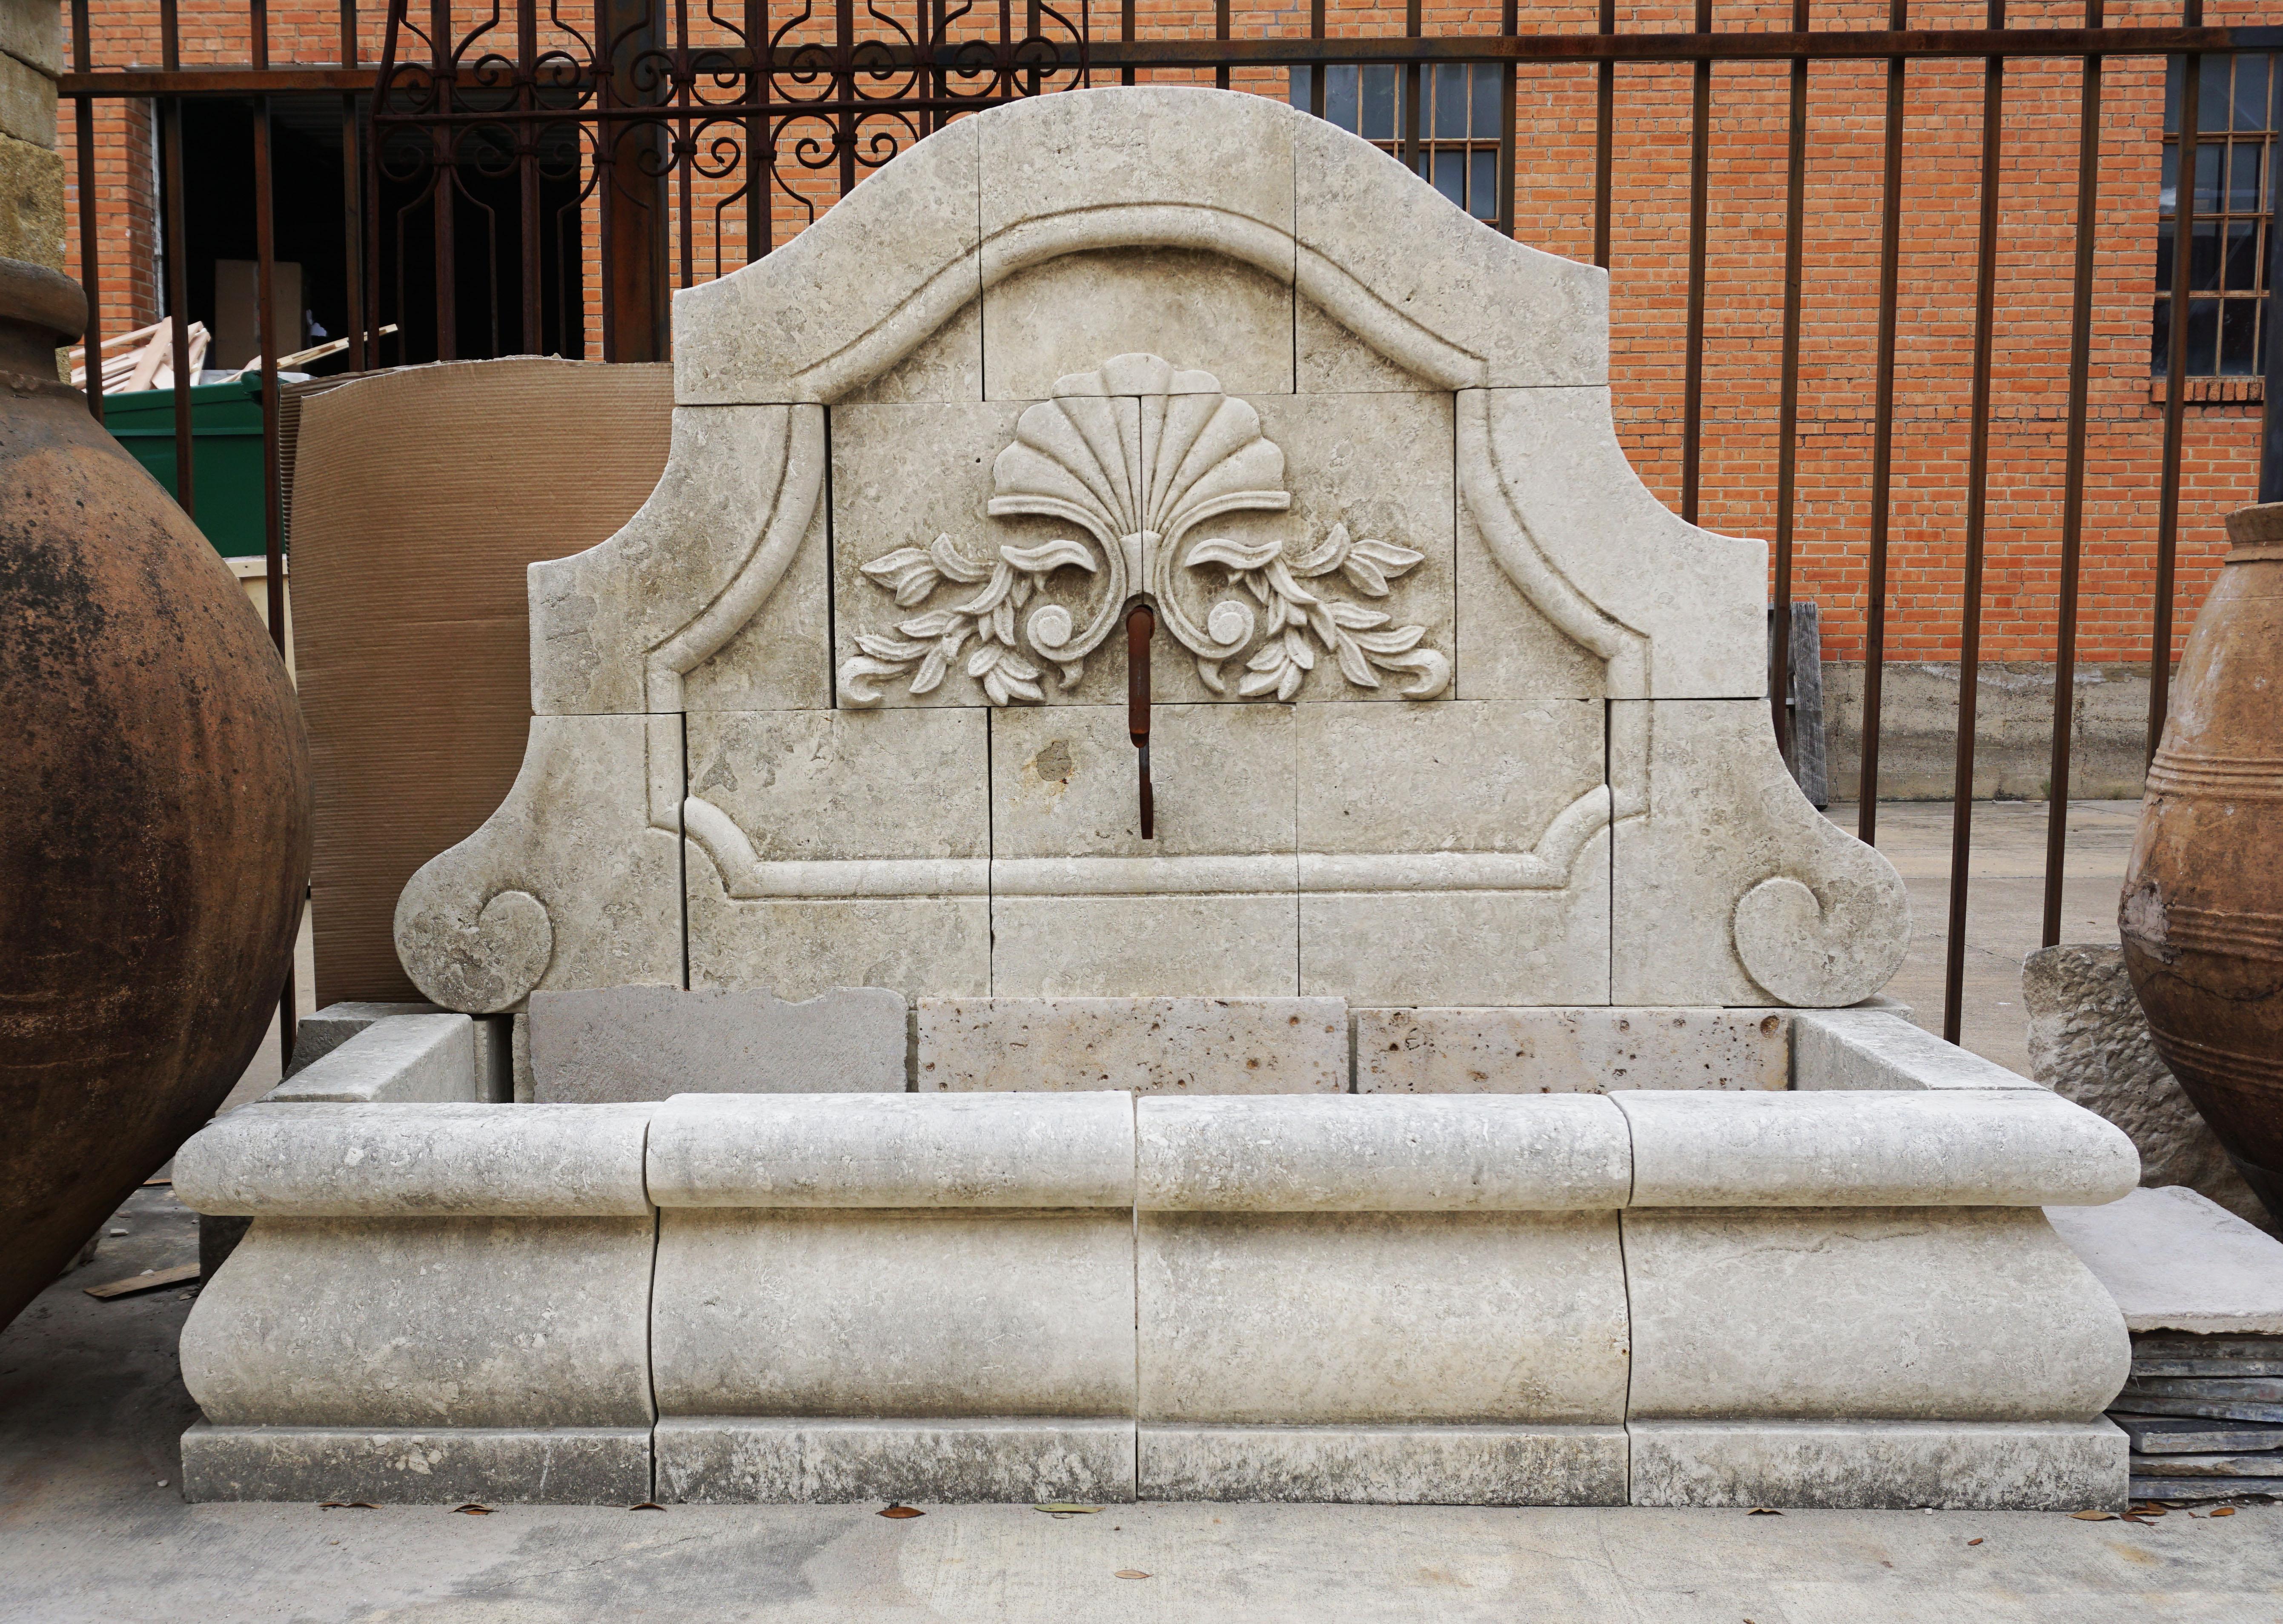 Narrow hand carved limestone wall fountain with fan floral motif and scroll decor

Origin: France

Measurements: 64